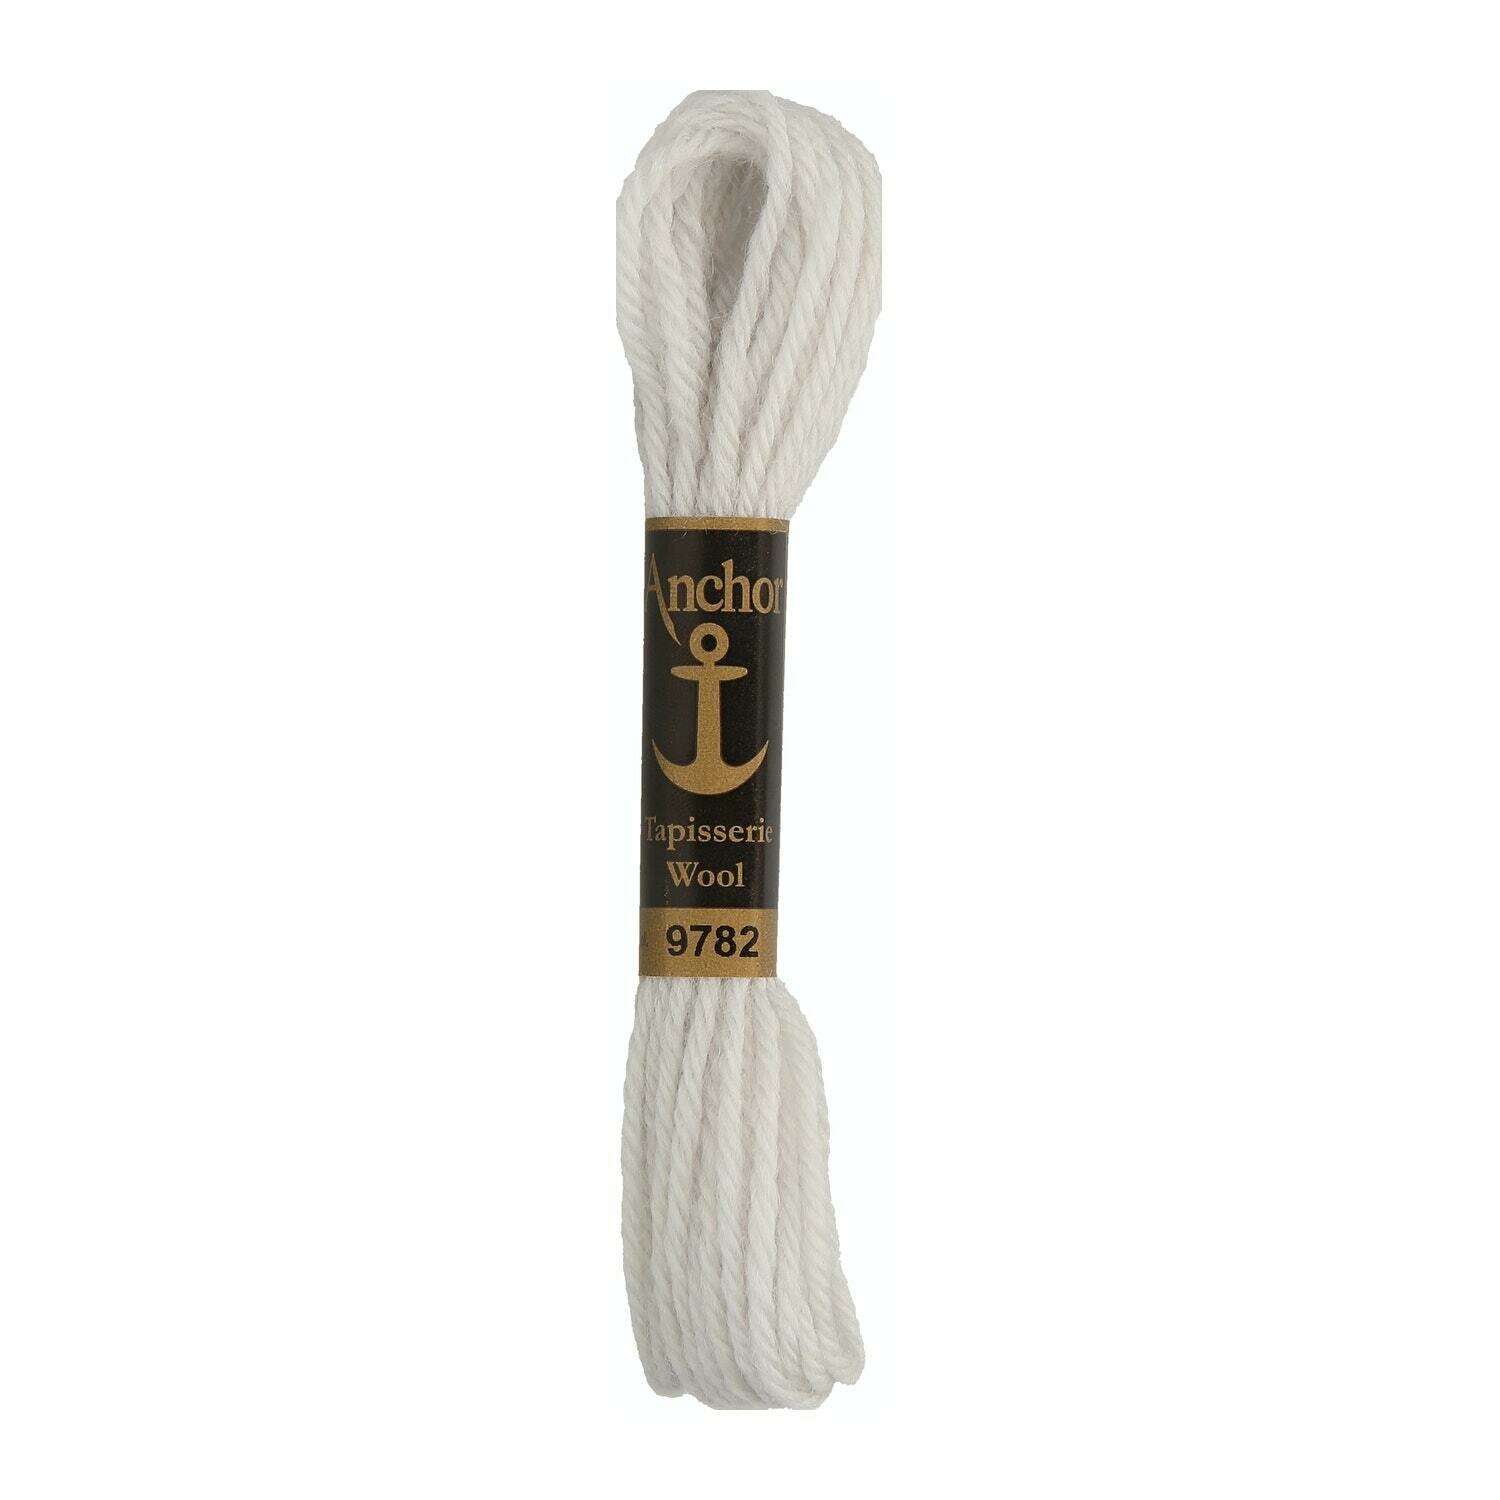 Anchor Tapisserie Wool #  09782